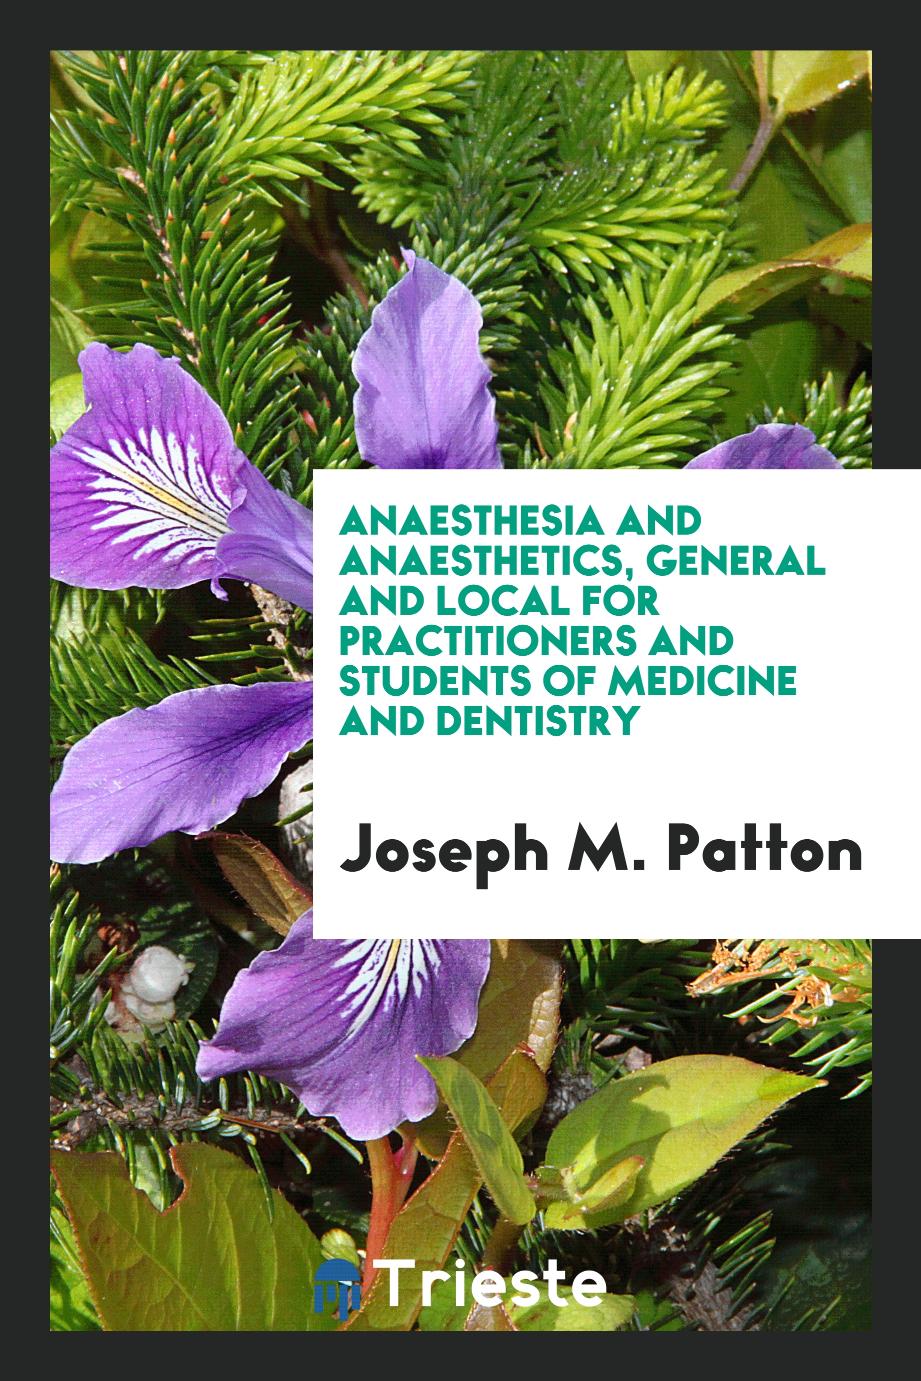 Anaesthesia and Anaesthetics, General and Local for Practitioners and Students of Medicine and Dentistry